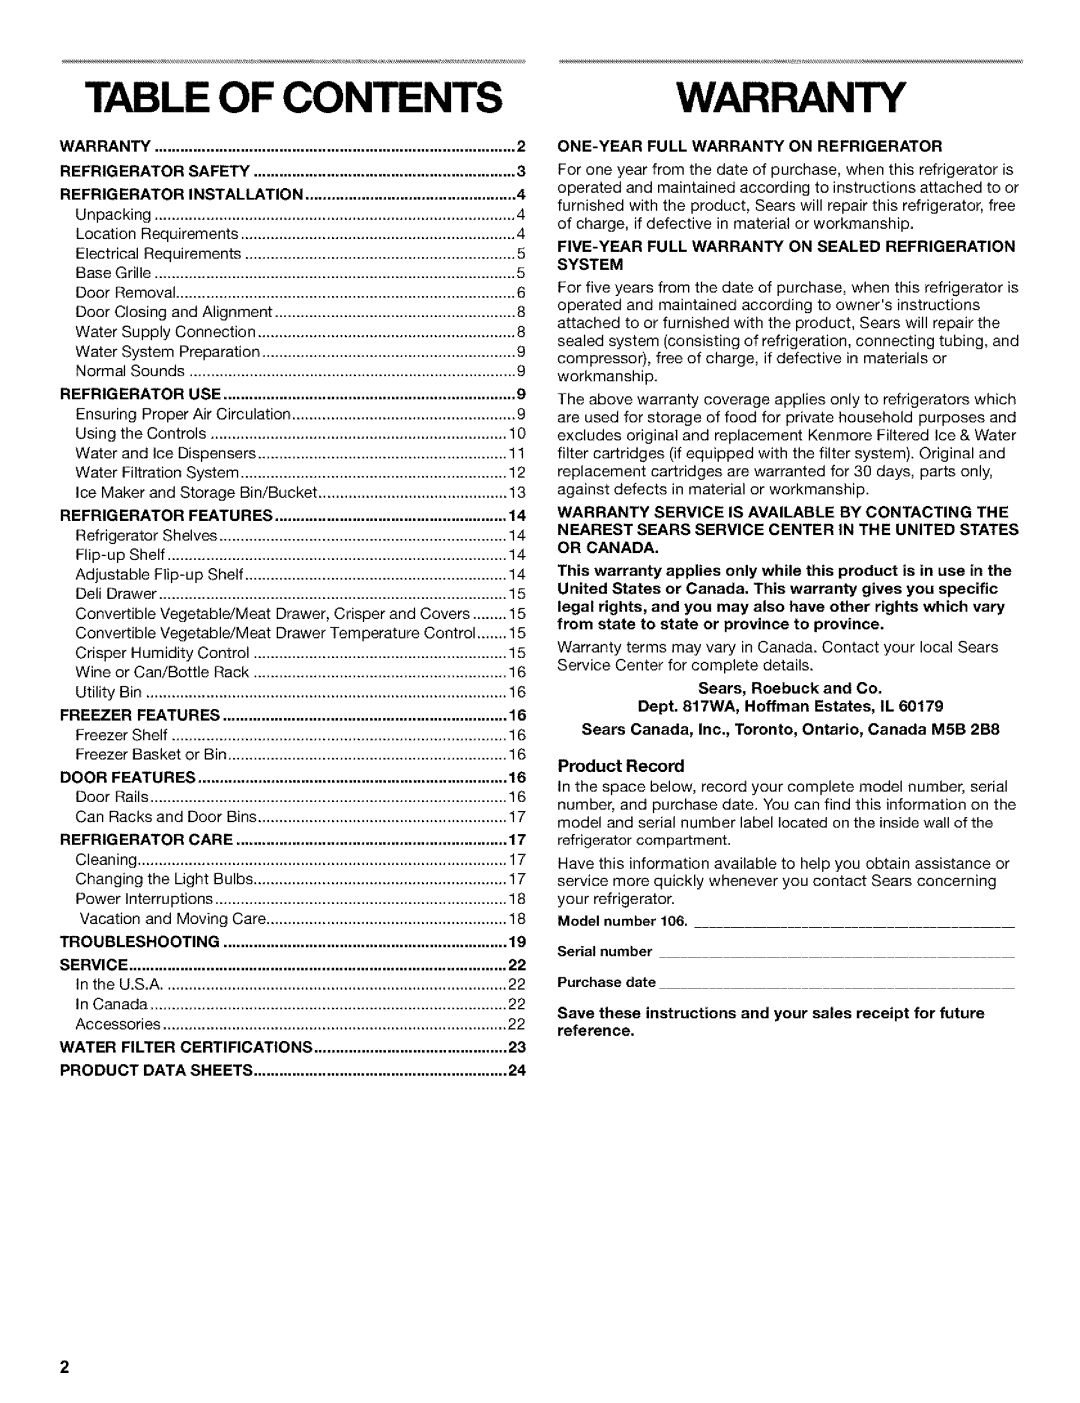 Kenmore 2220694 Table Of Contents, Product, One-Year Full Warranty On Refrigerator, System, Sears, Roebuck and Co 